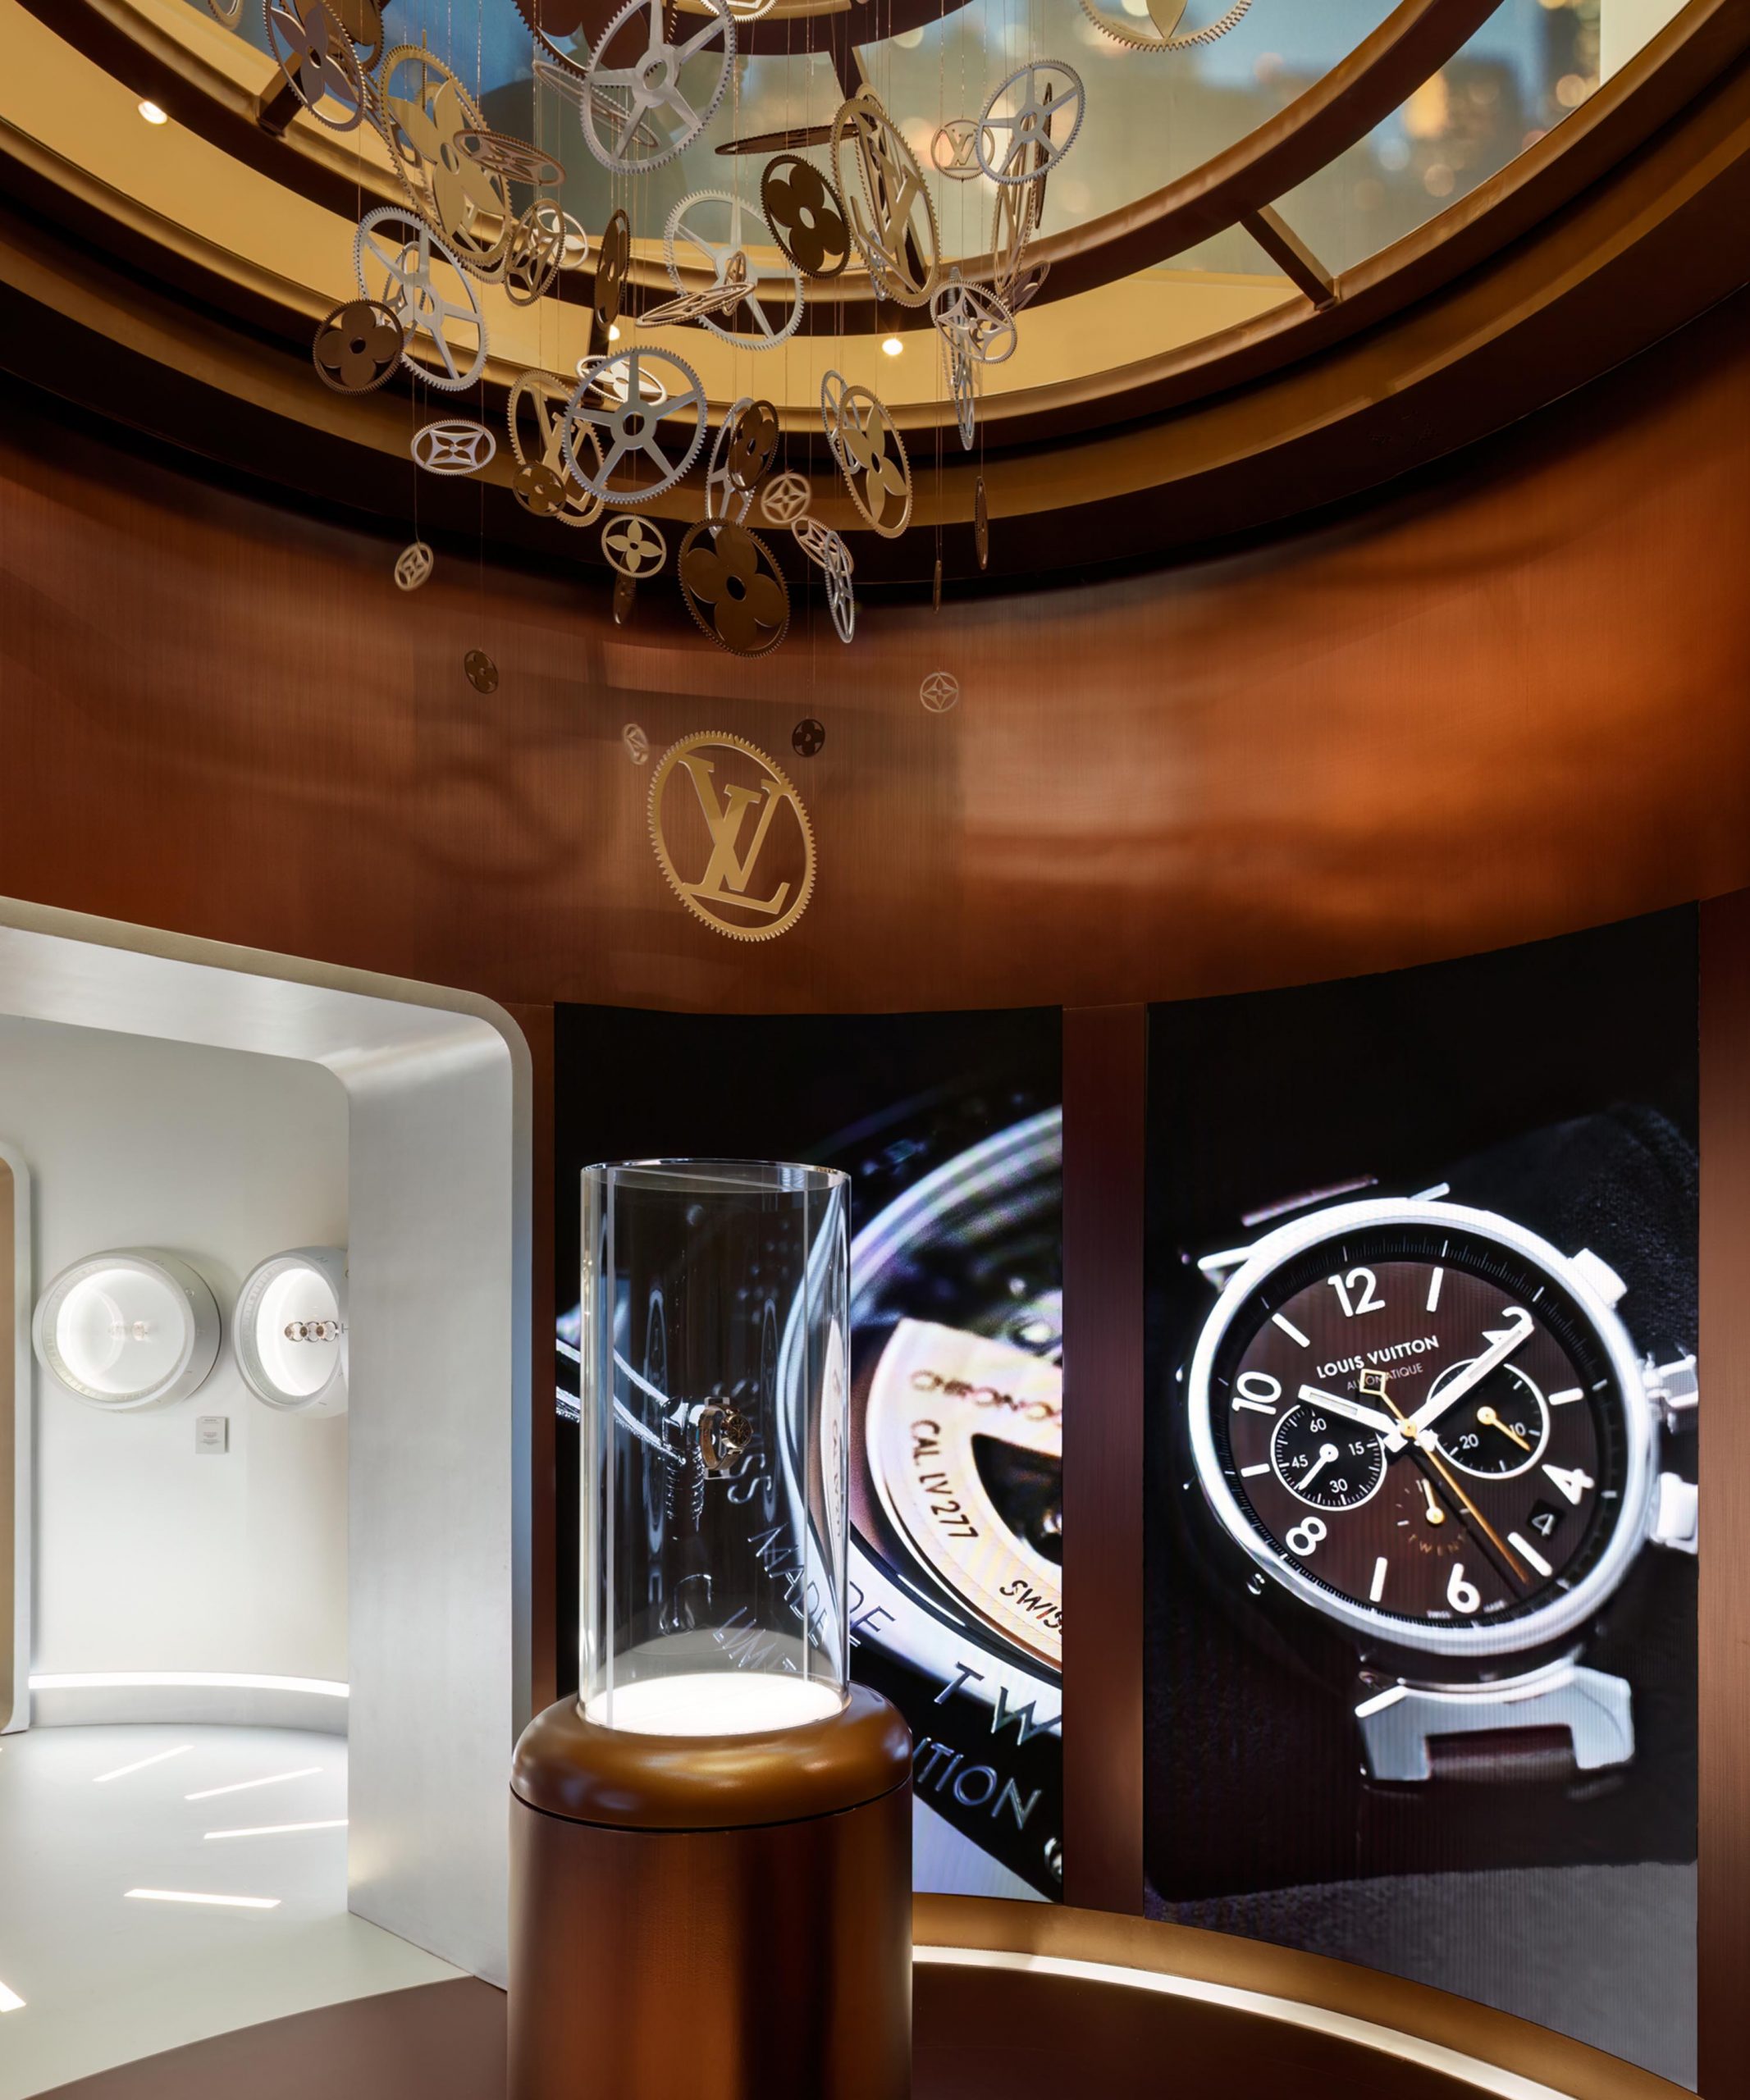 The Louis Vuitton Tambour Celebrates 20 Years with the Tambour Twenty